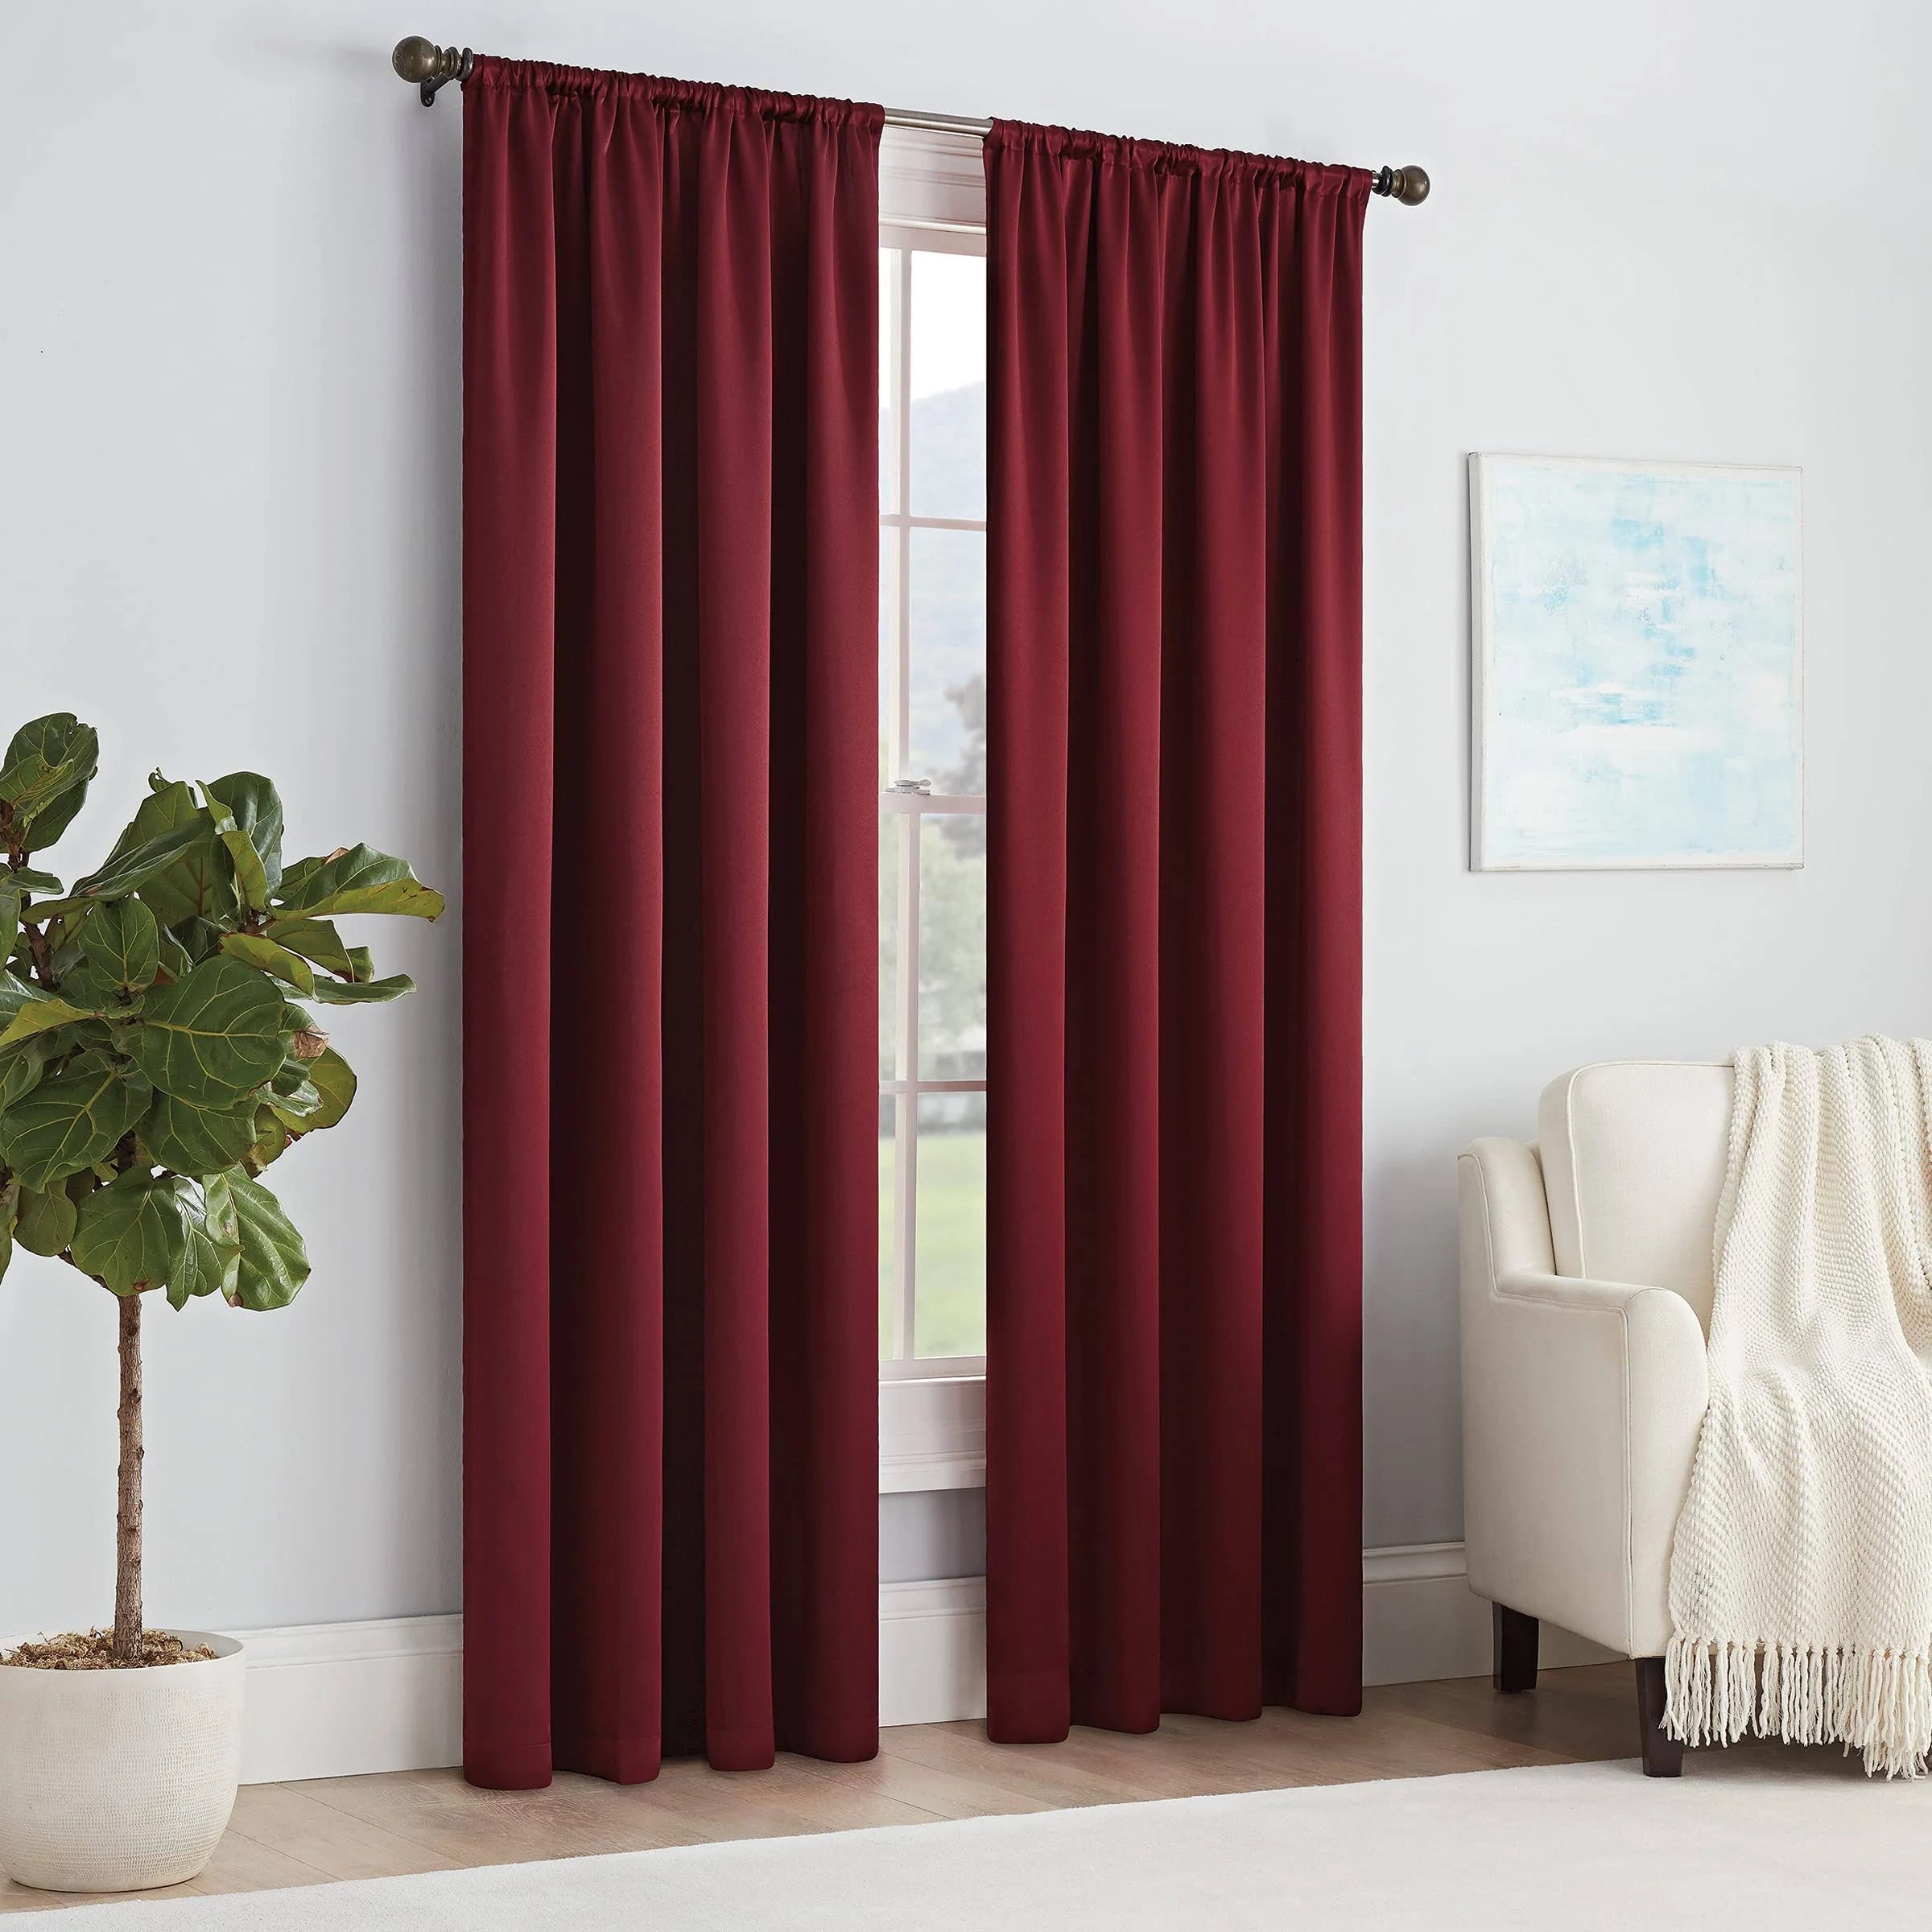 Red Thermapanel Curtain Panel for Energy-Efficient Light Blocking | Image